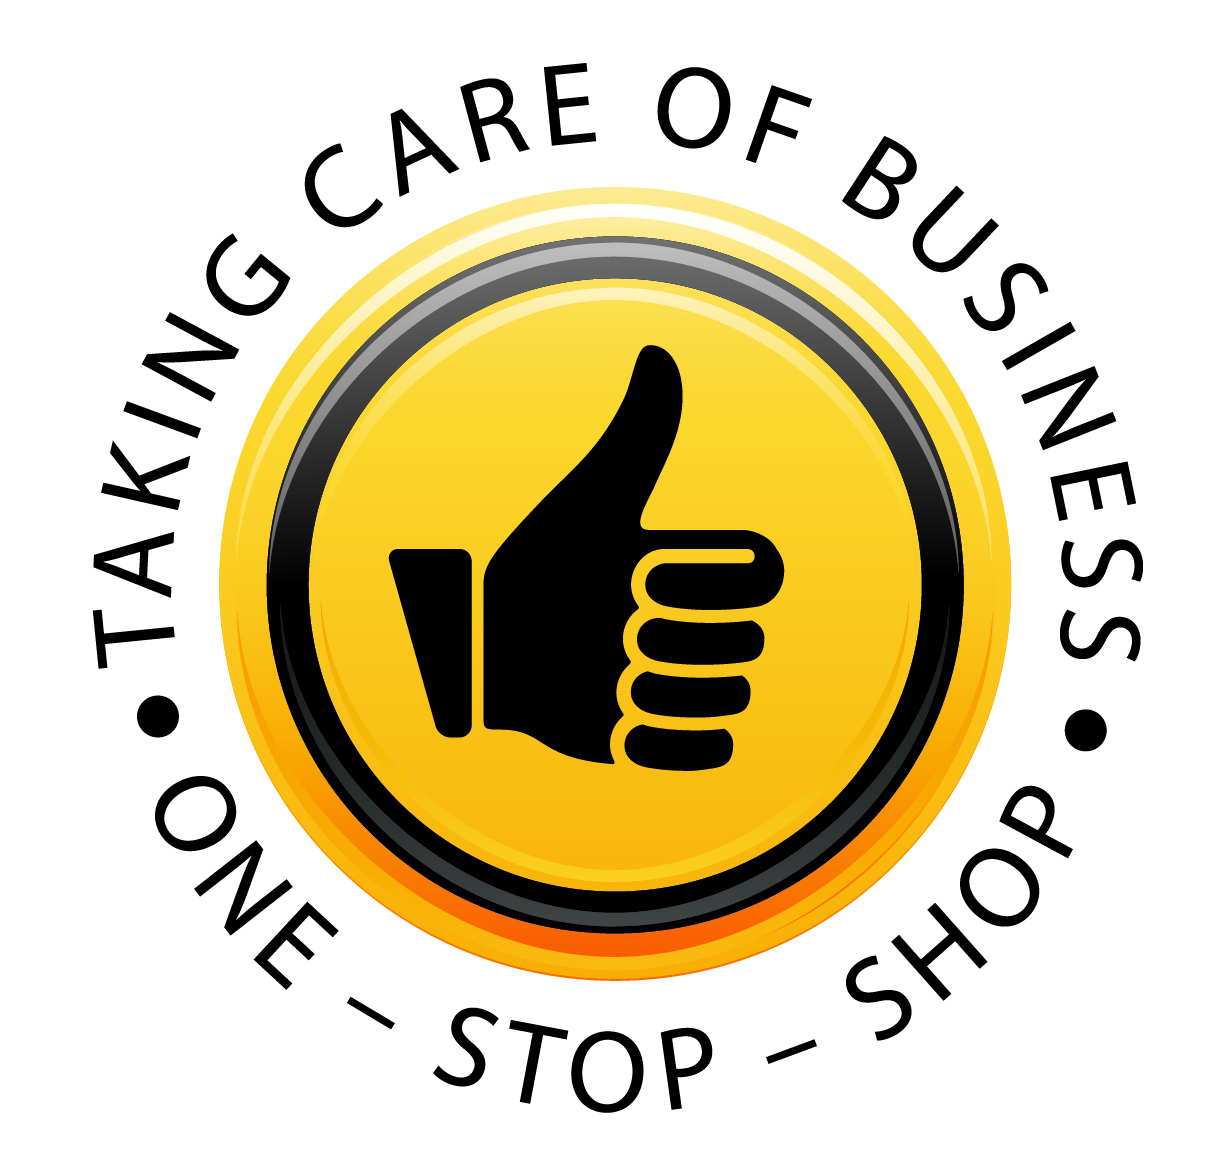 Taking Care of Business logo